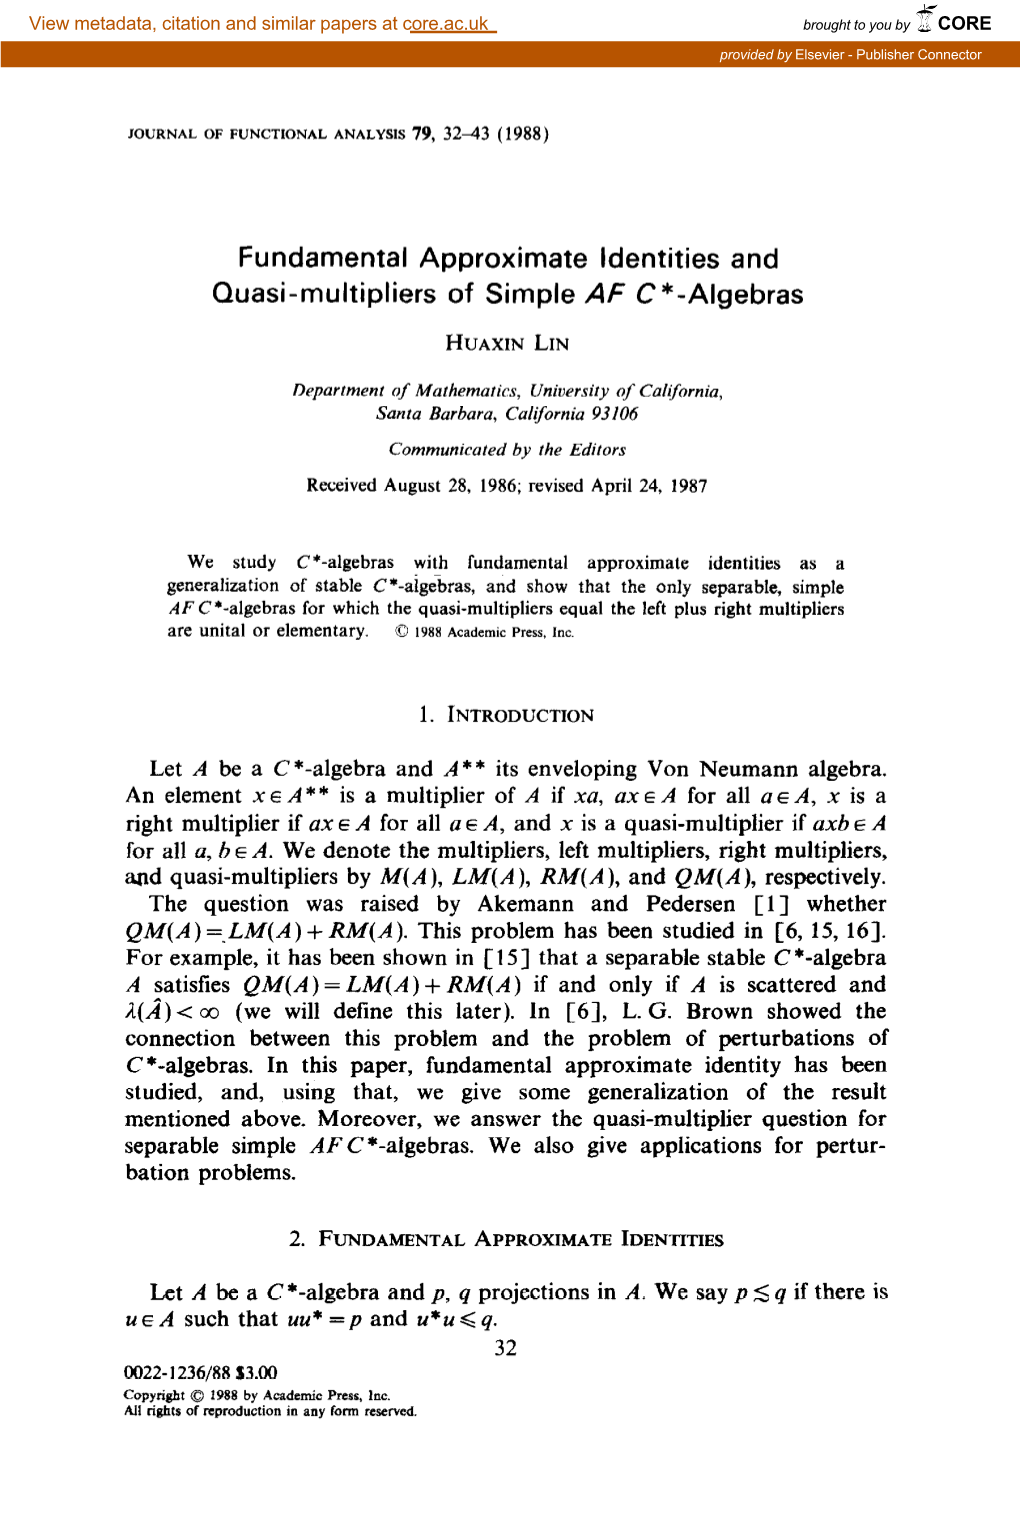 Fundamental Approximate Identities and Quasi-Multipliers of Simple AF C*-Algebras